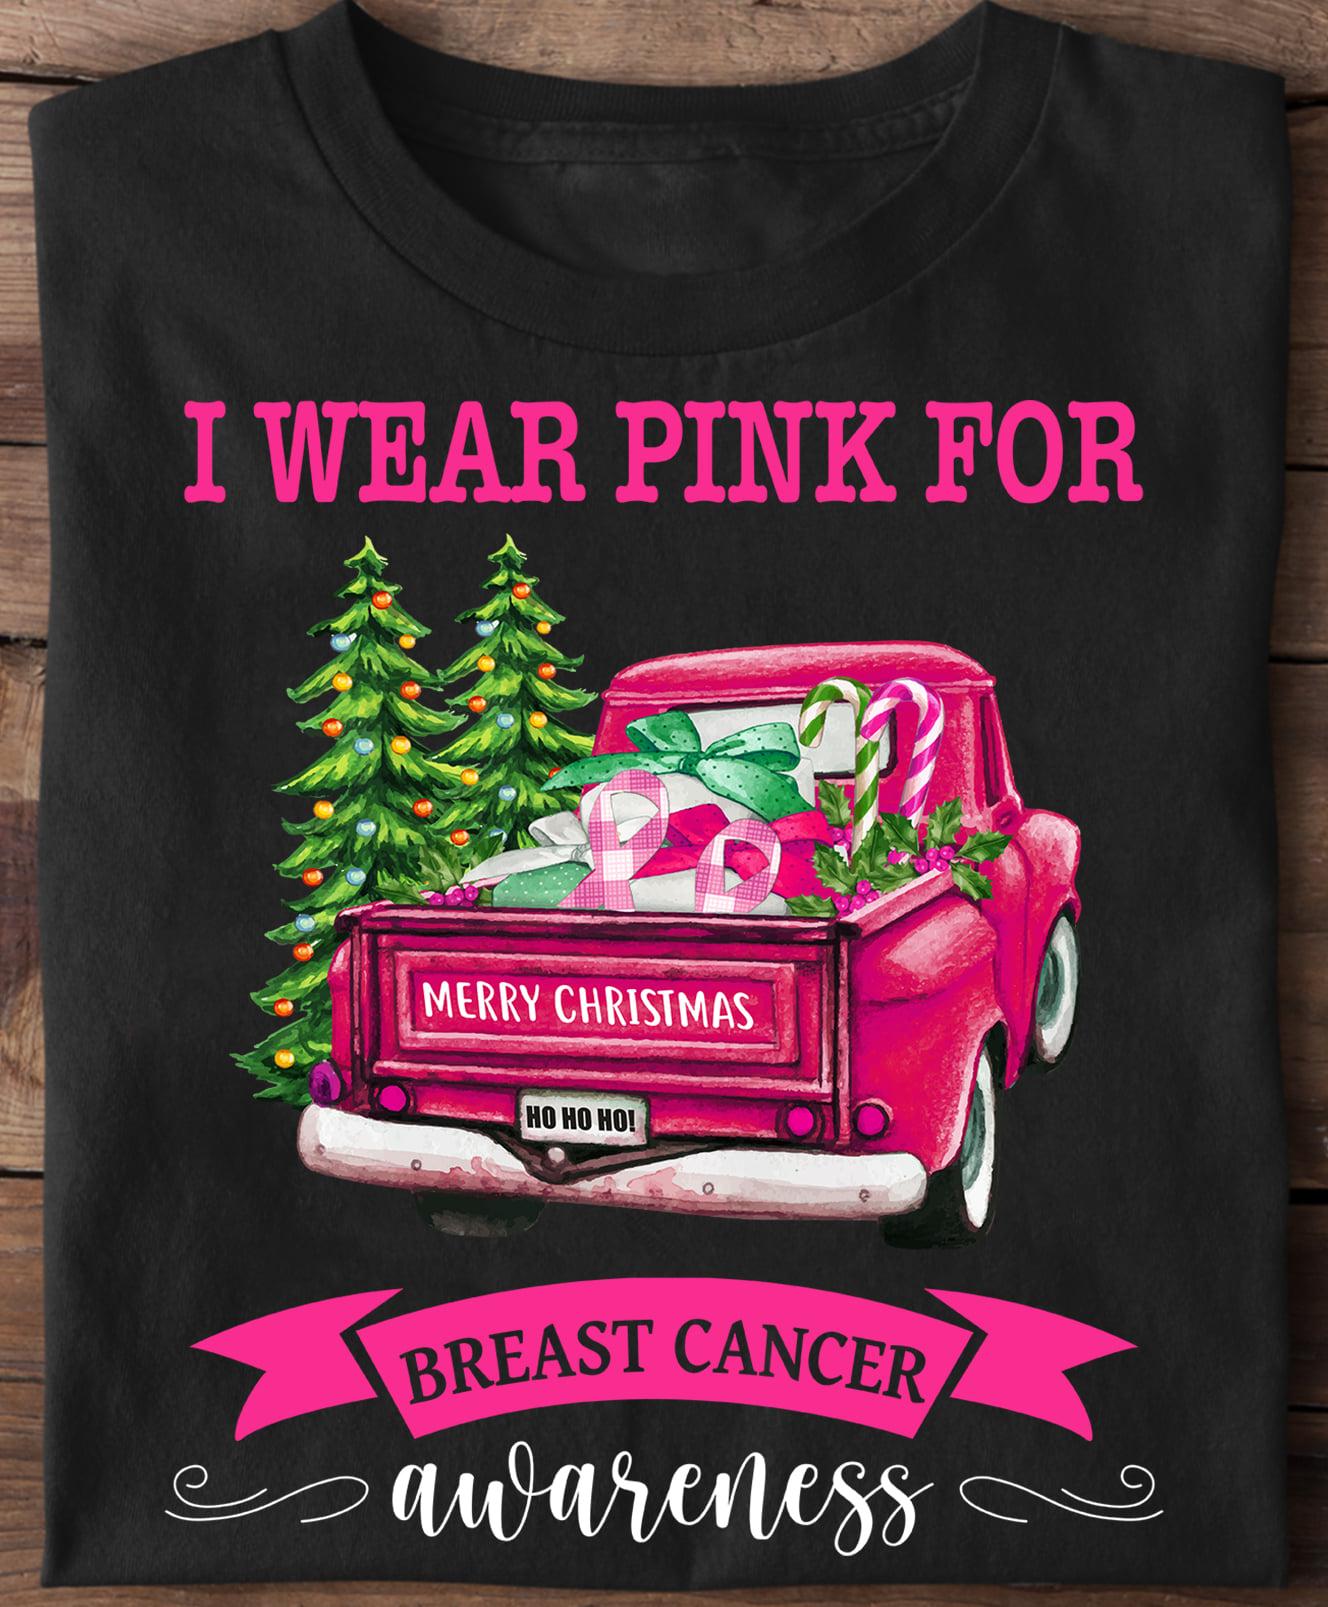 I wear pink for Breast cancer awareness - Merry Christmas pink truck, Christmas ugly sweater